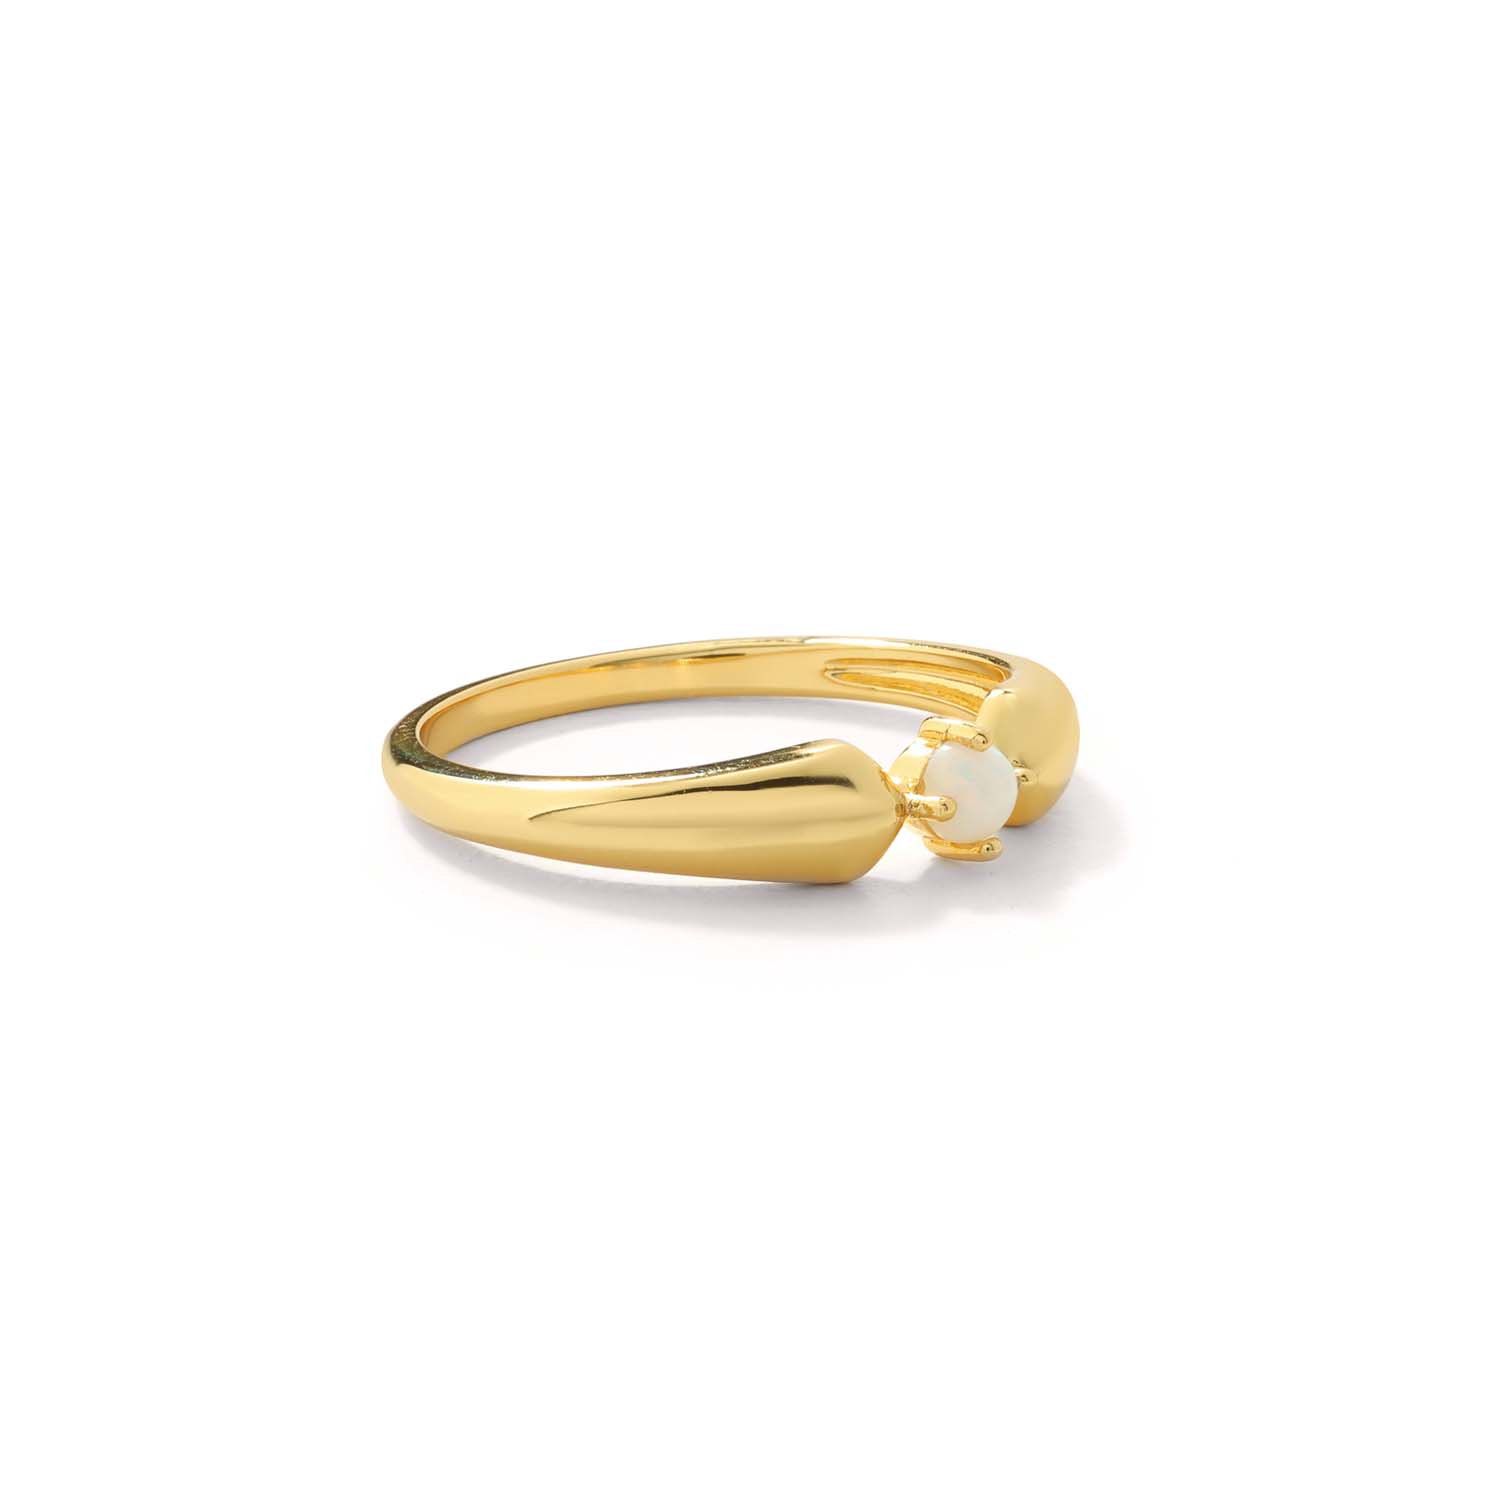 Elegant and minimalist gold ring set with opals.